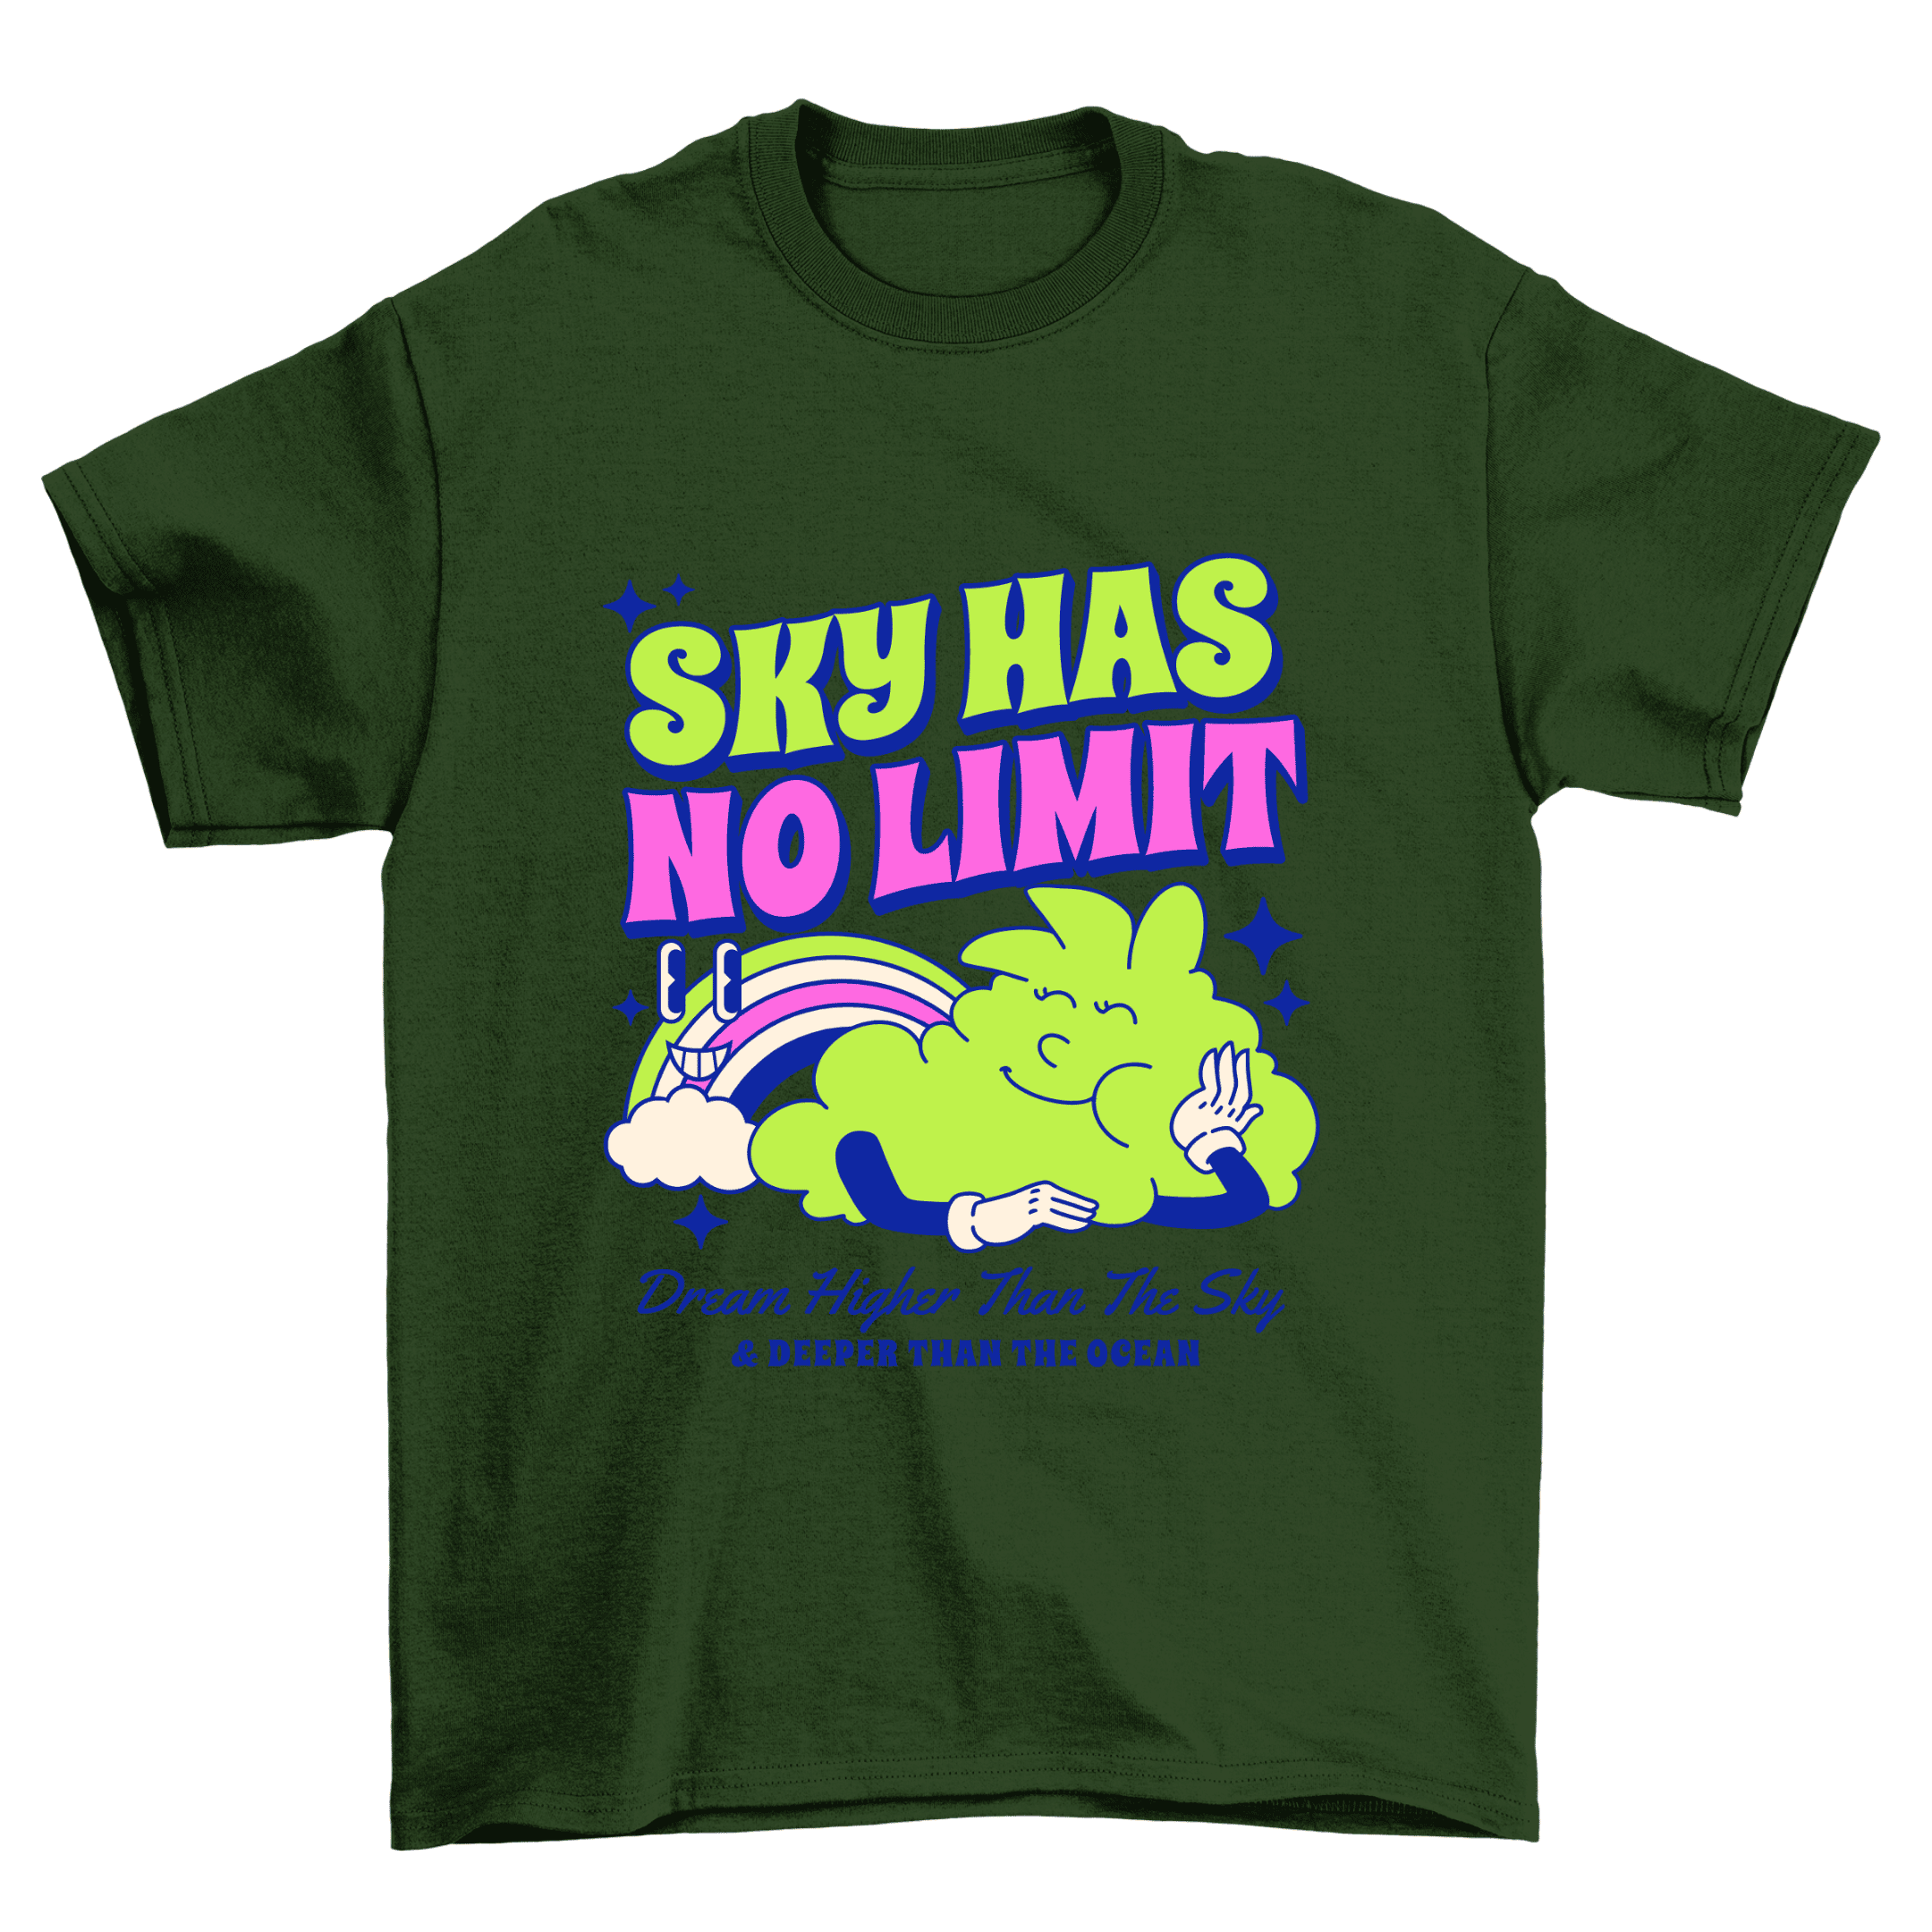 Sky Has No Limit: Unisex Graphic T-shirt | Graphic Tees